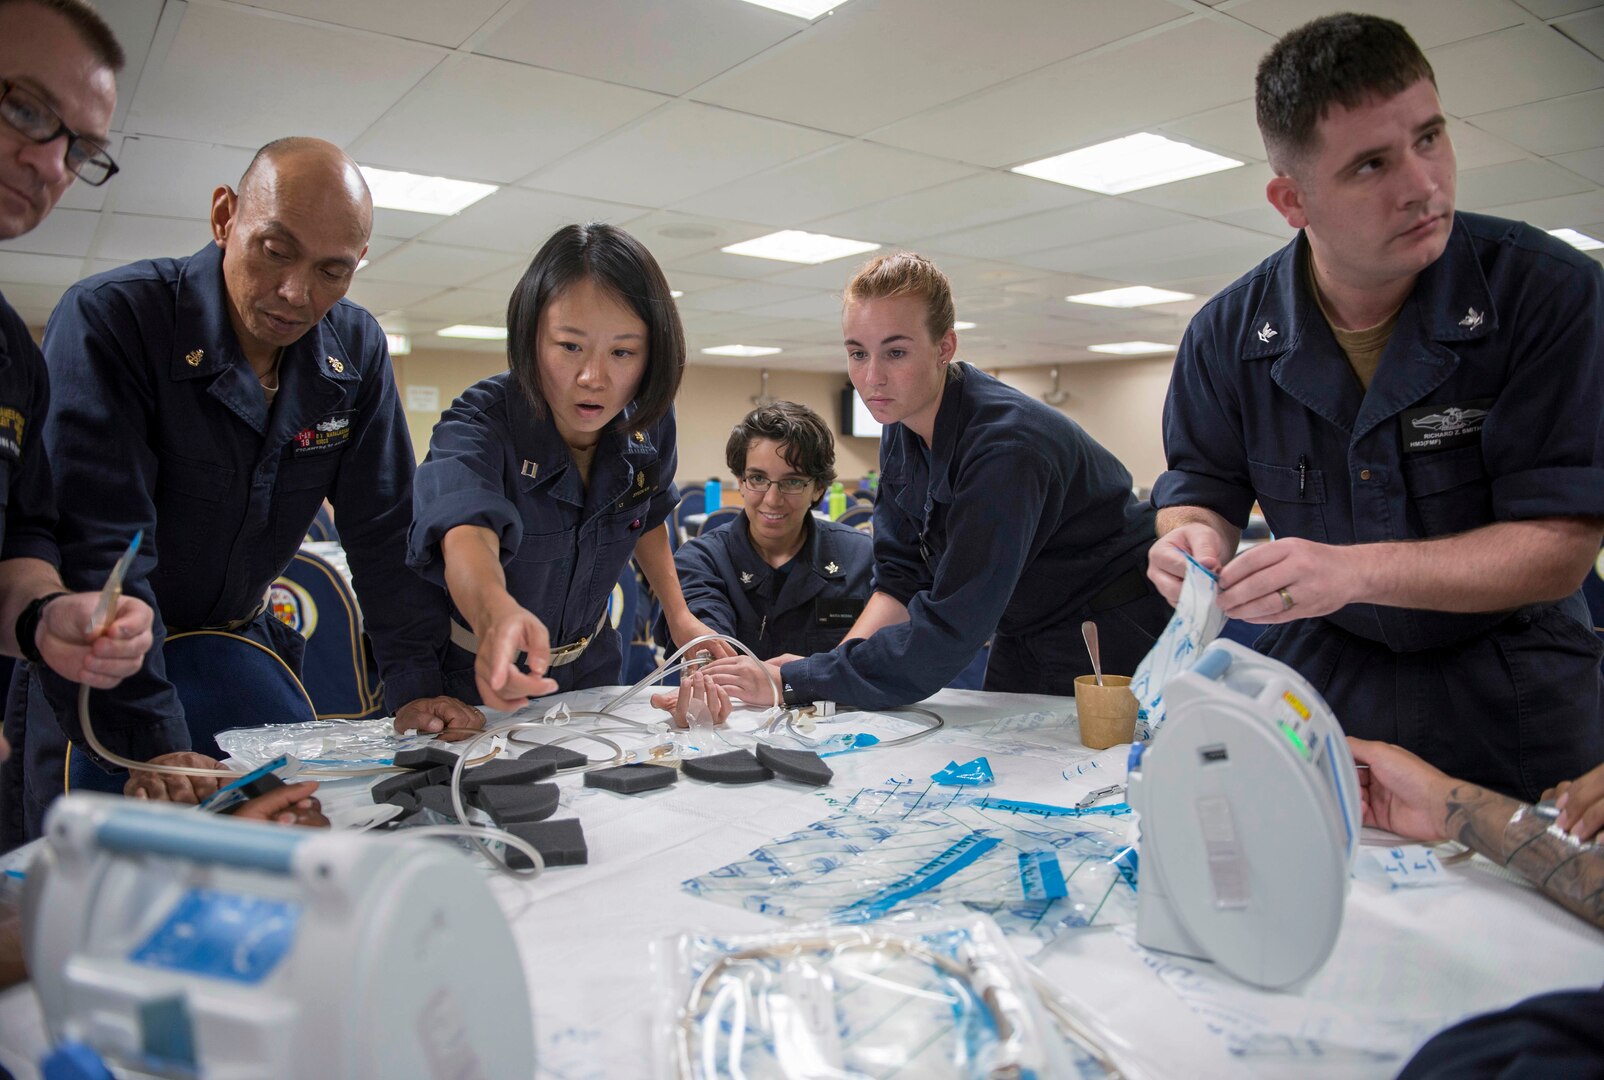 Sailors learn about negative pressure wound therapy during skin and wound care course aboard USNS Mercy, in support of upcoming Pacific Partnership
2018 missions, Pacific Ocean, May 14, 2018 (U.S. Navy/Cameron Pinske)